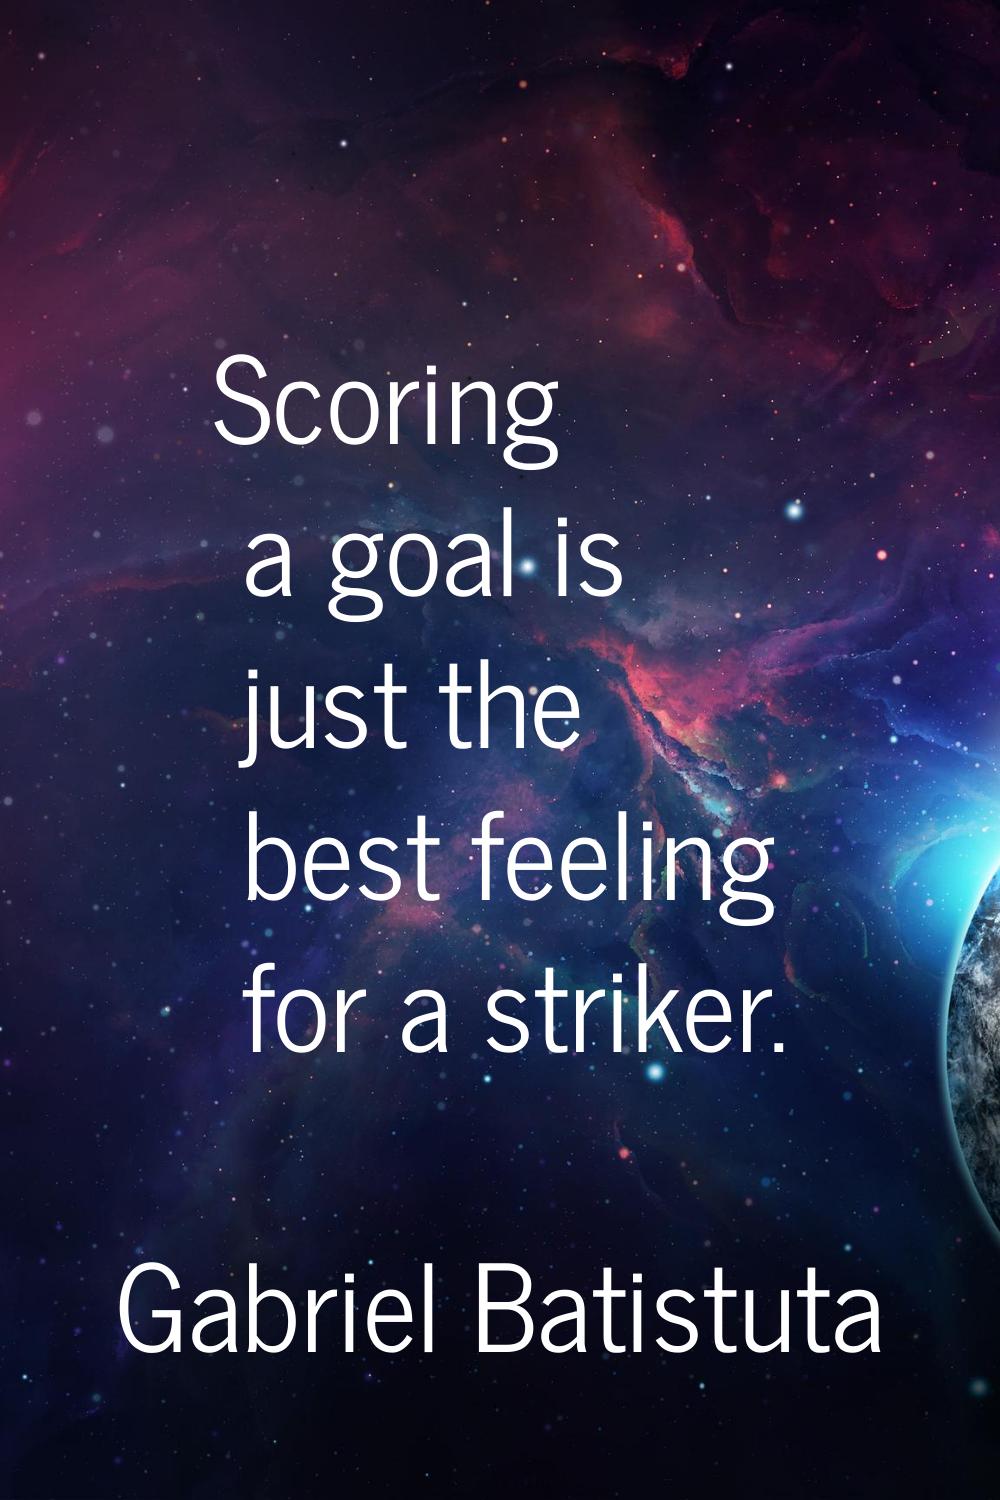 Scoring a goal is just the best feeling for a striker.